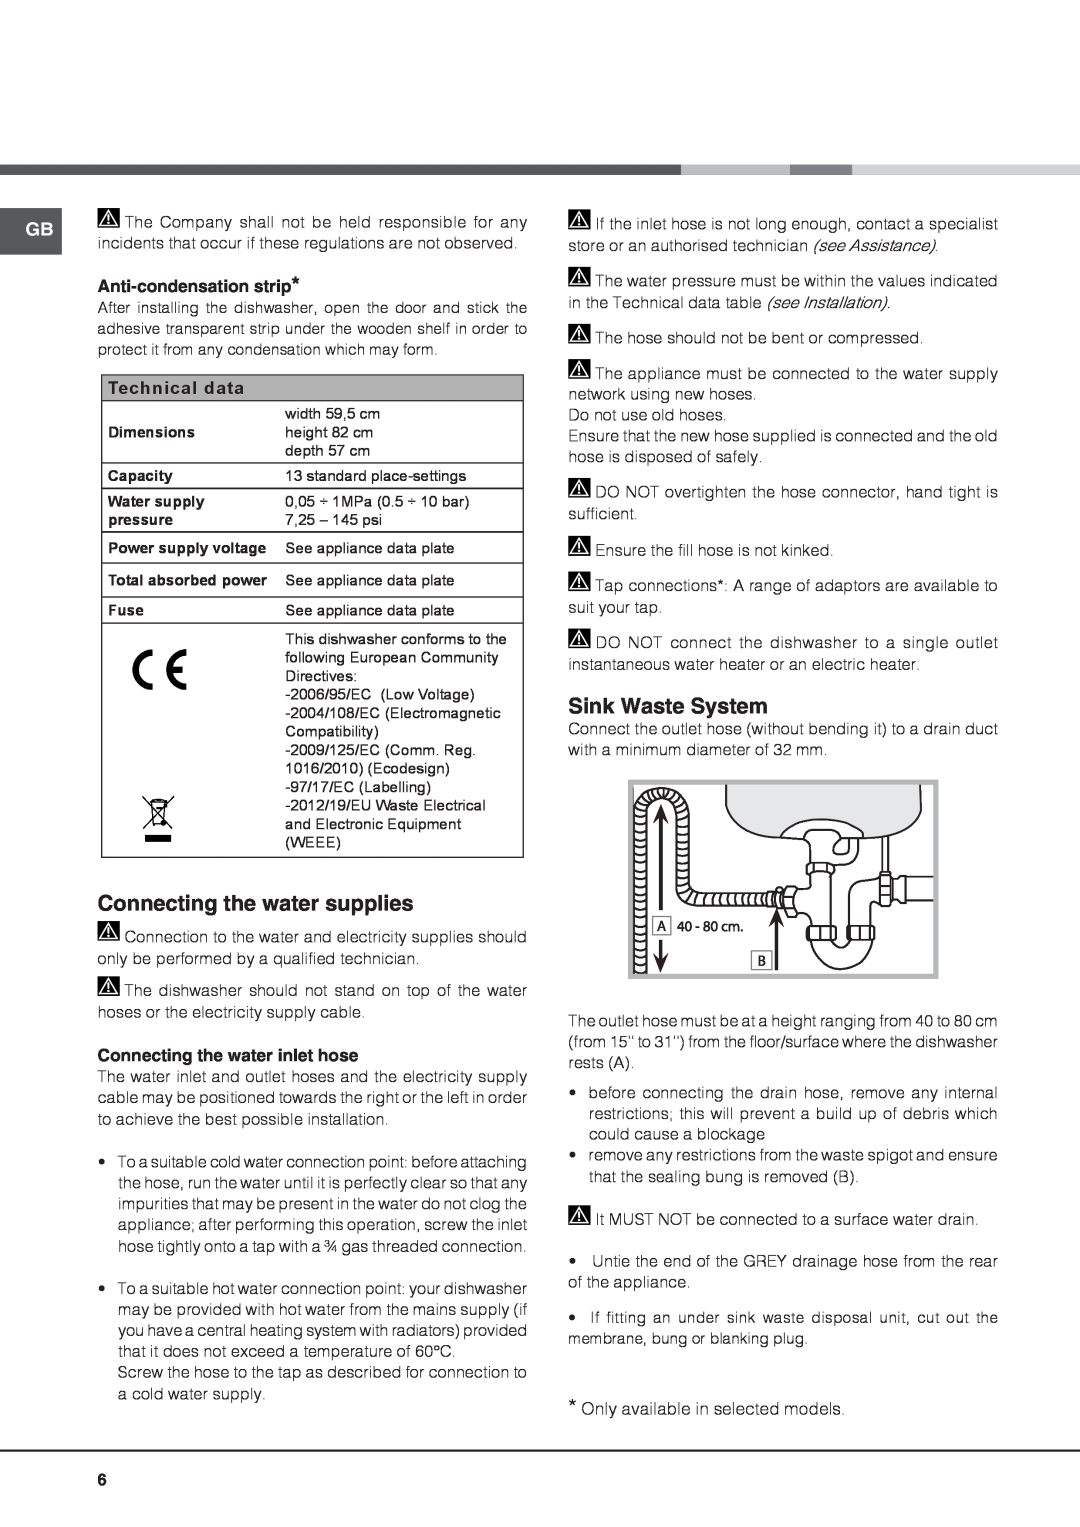 Hotpoint LSB 5B019 manual Connecting the water supplies, Sink Waste System, Anti-condensation strip, Technical data 